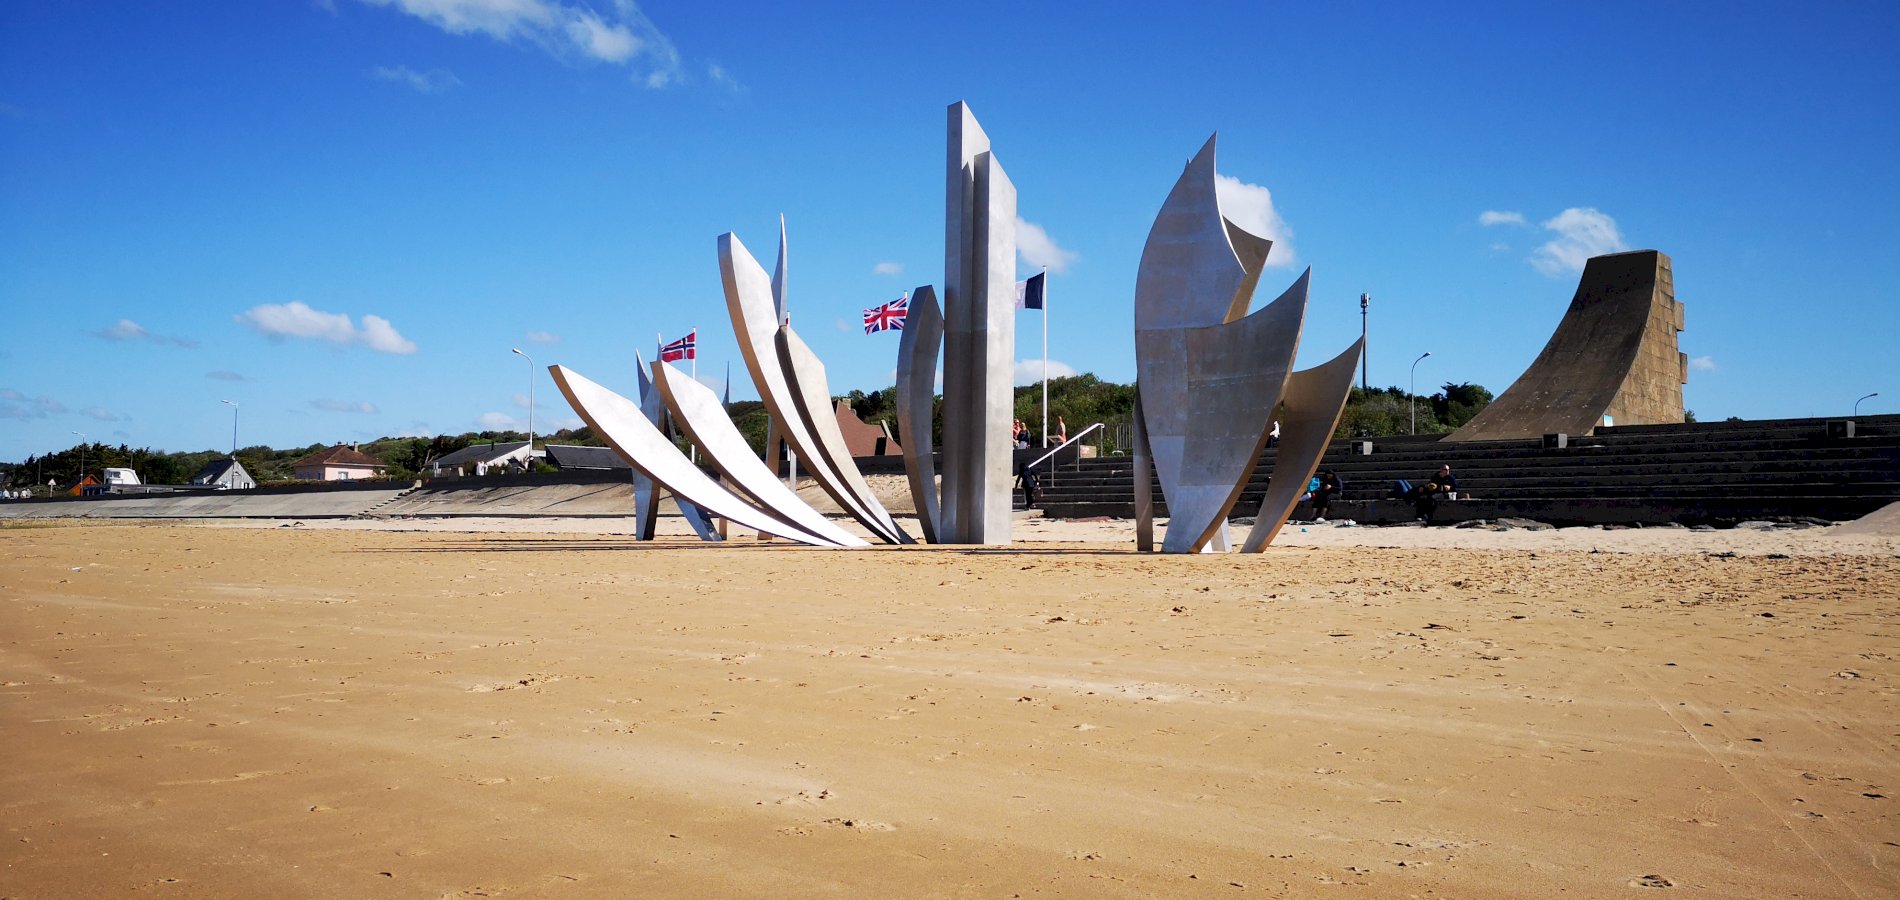 Ophorus Tours - Normandy D DAY Landing Beaches Small Group Private Shore Excursion from Le Havre